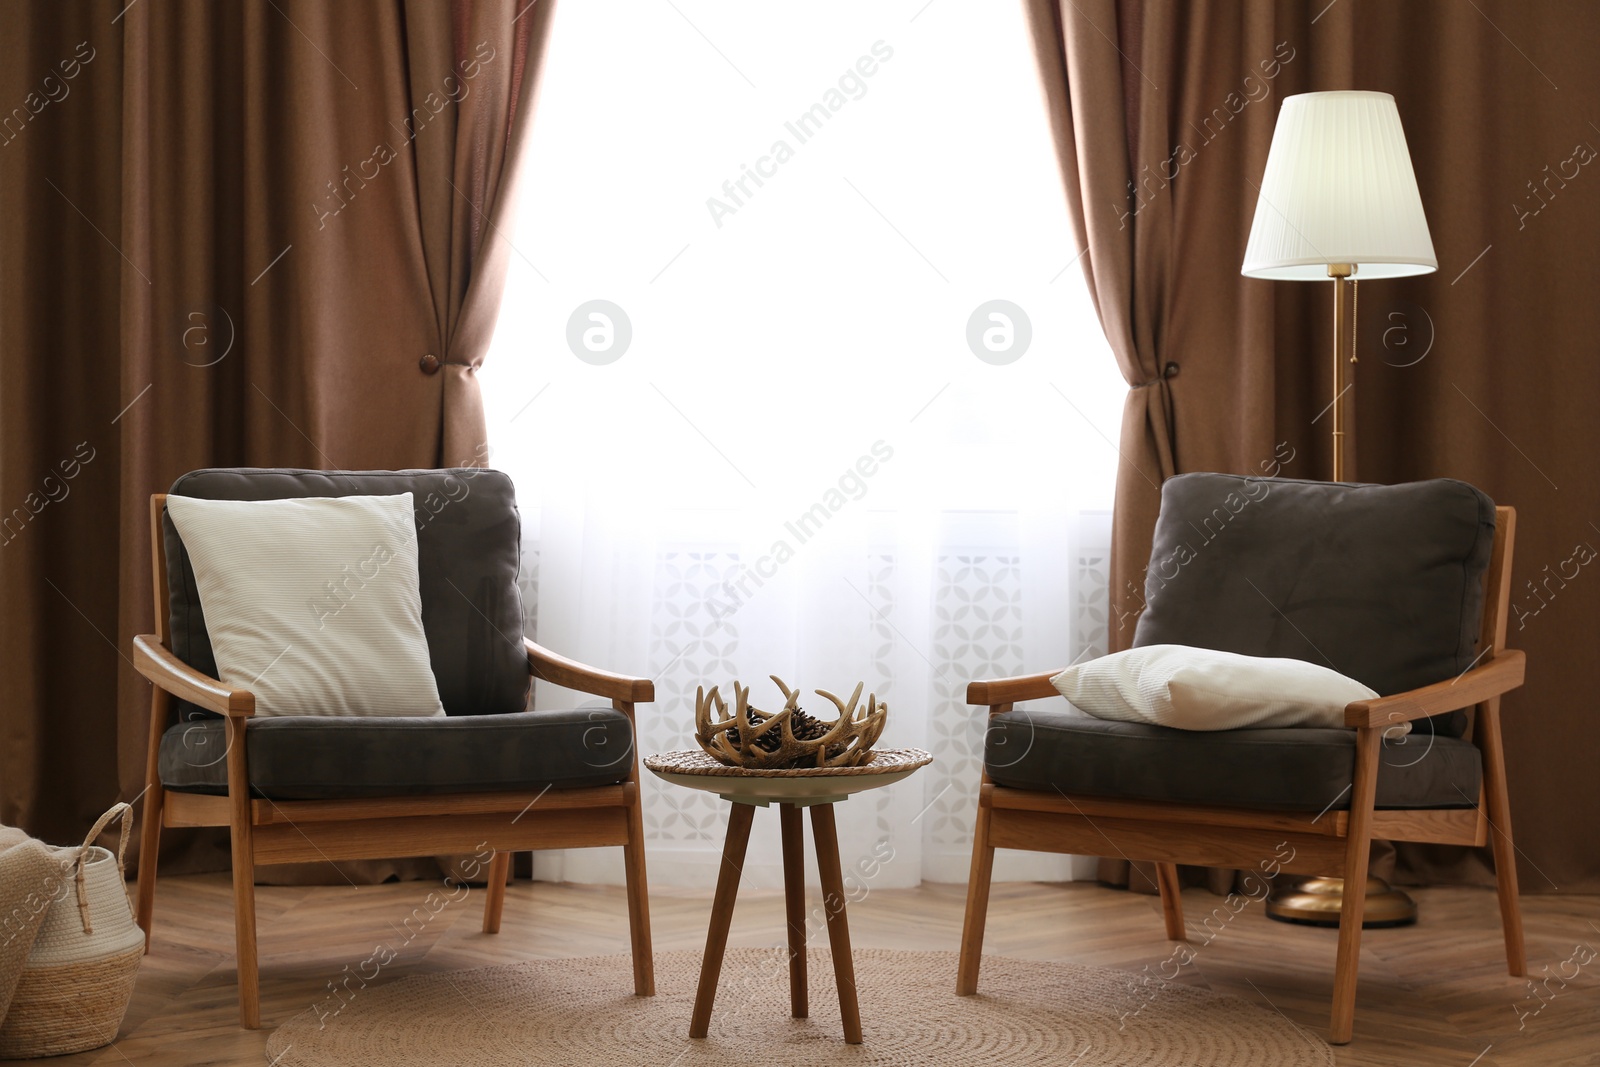 Photo of Comfortable armchairs near window with stylish curtains in living room. Interior design